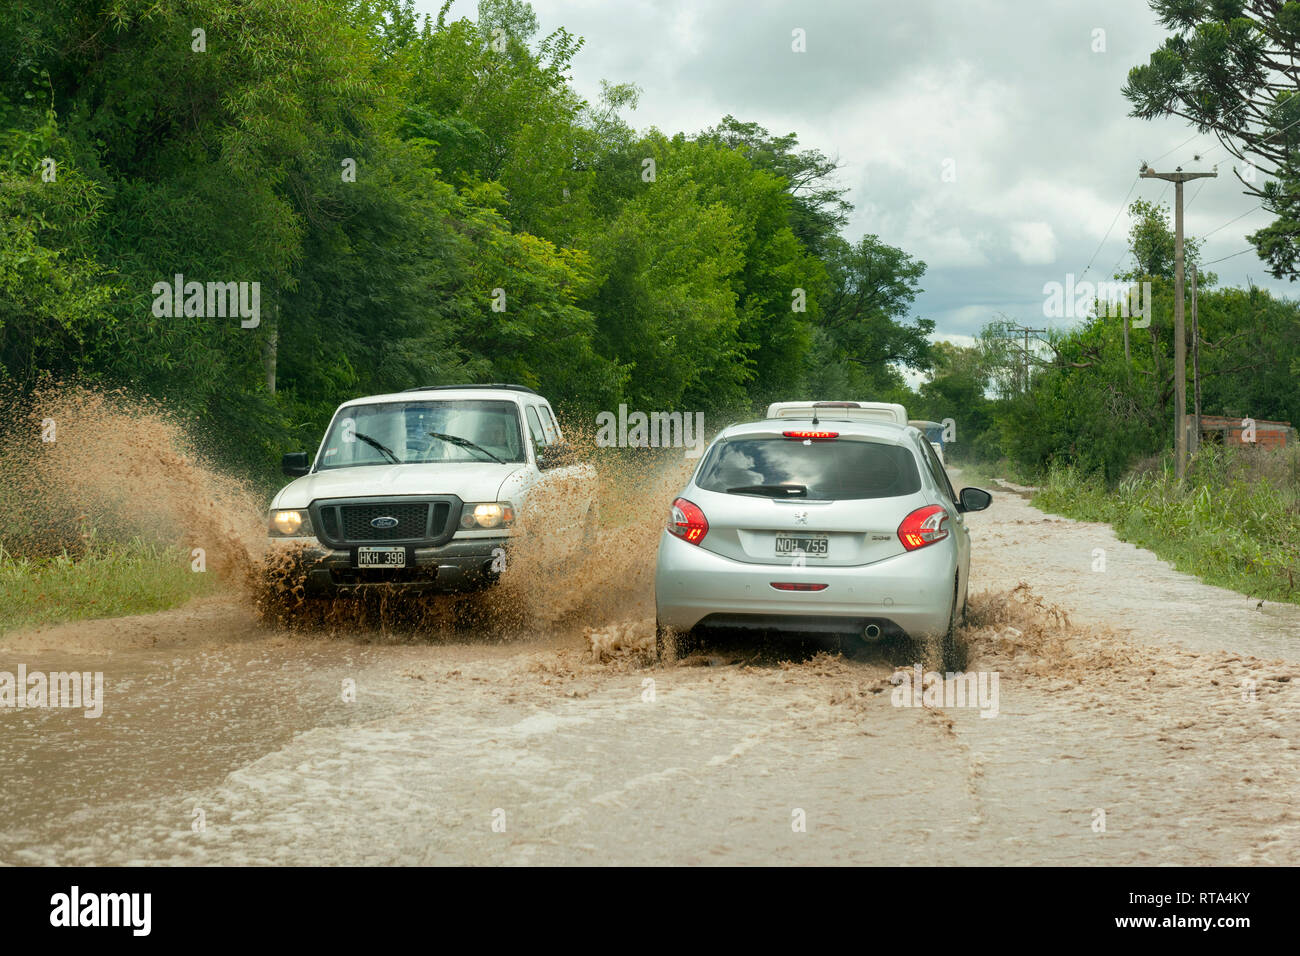 Traffic passing on a flooding affected road near El Carril, Salta Province, Argentina. Stock Photo